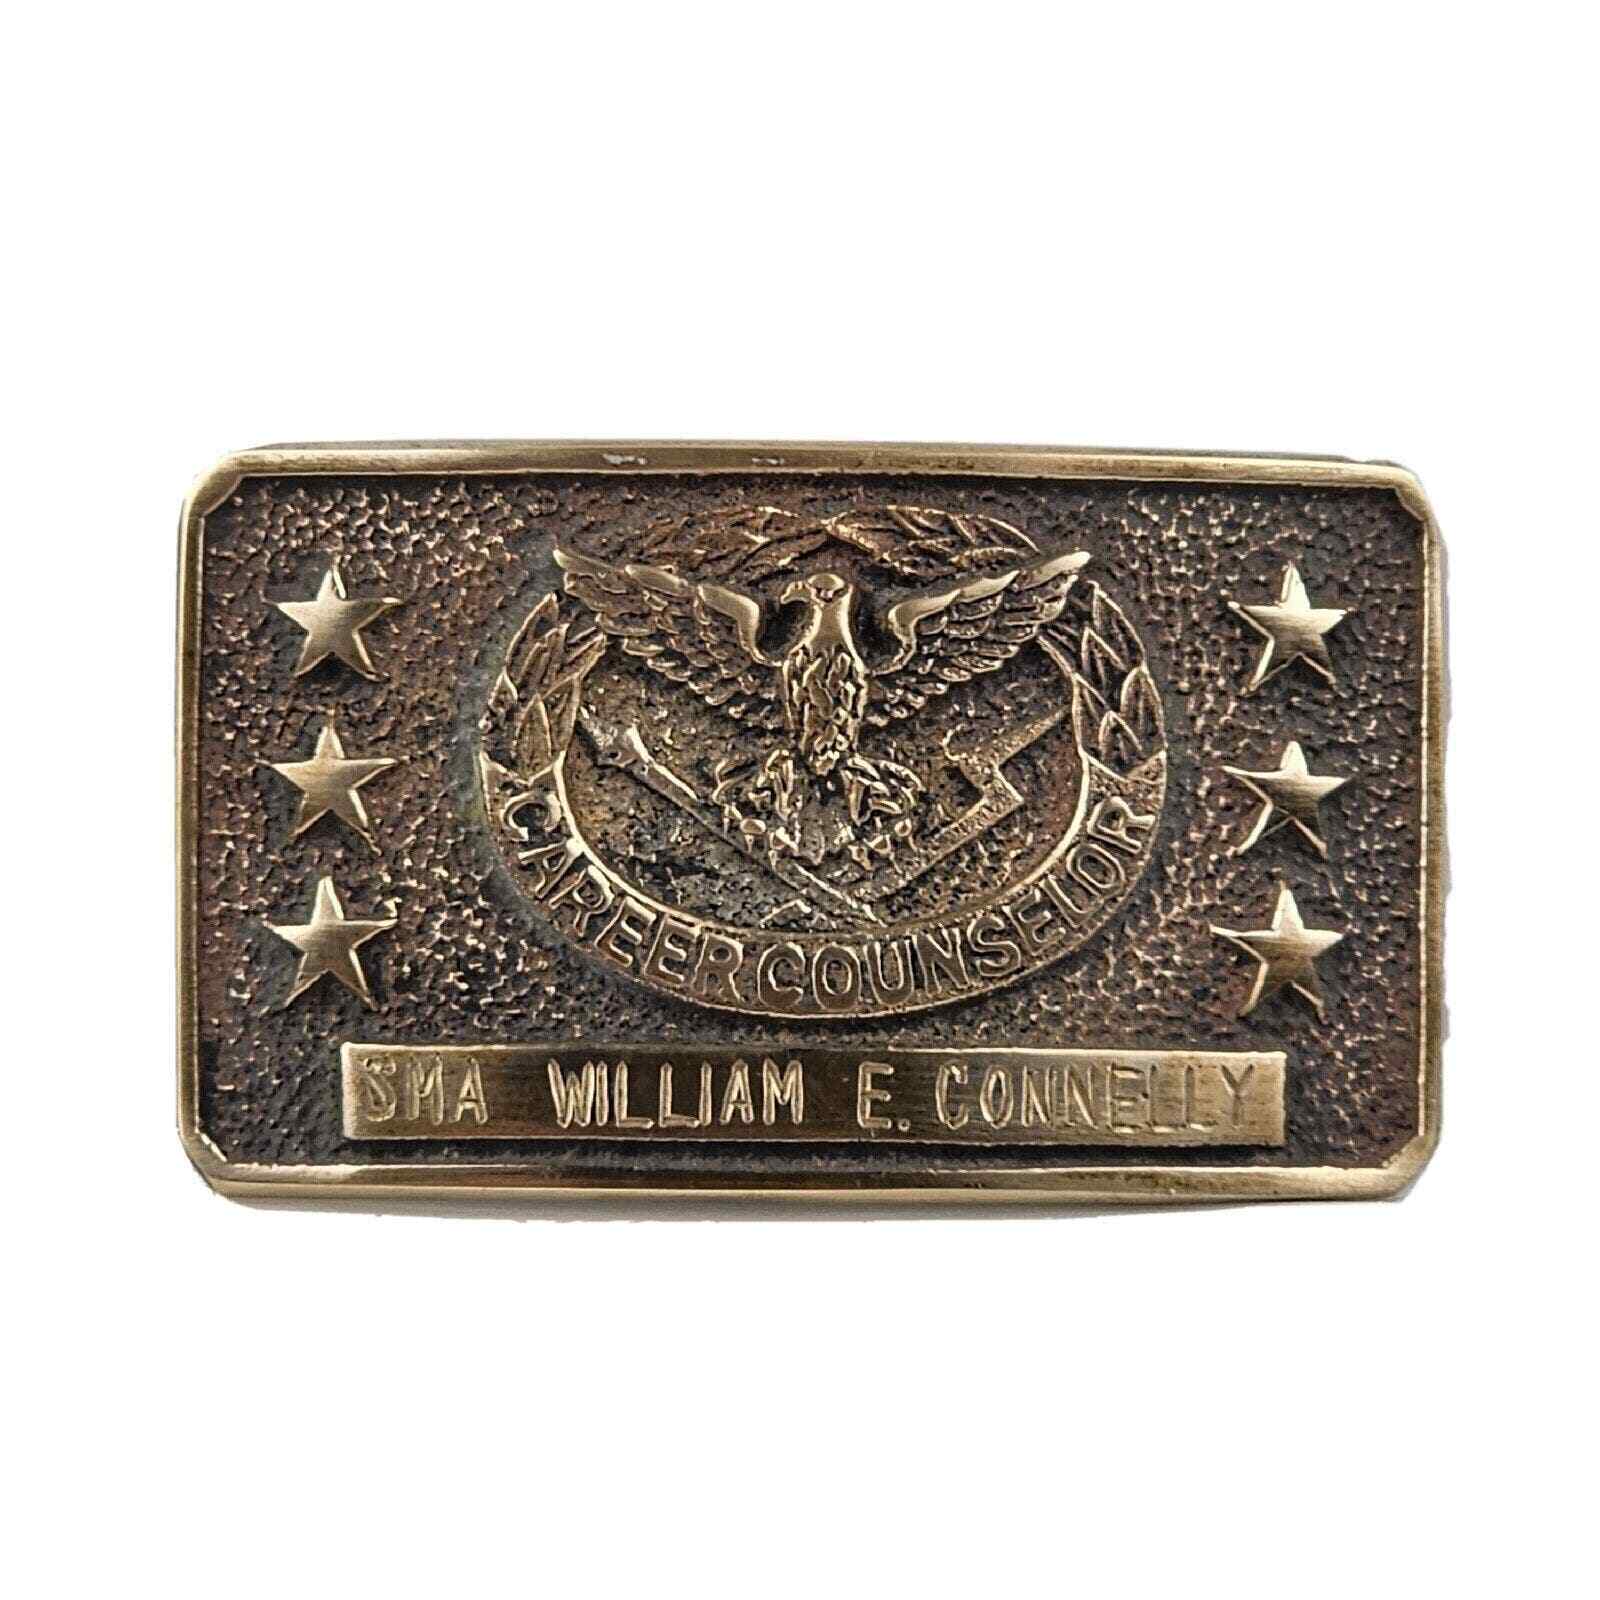 Vintage U.S. Army Belt Buckle for 6th Sgt Major of the Army William Connelly